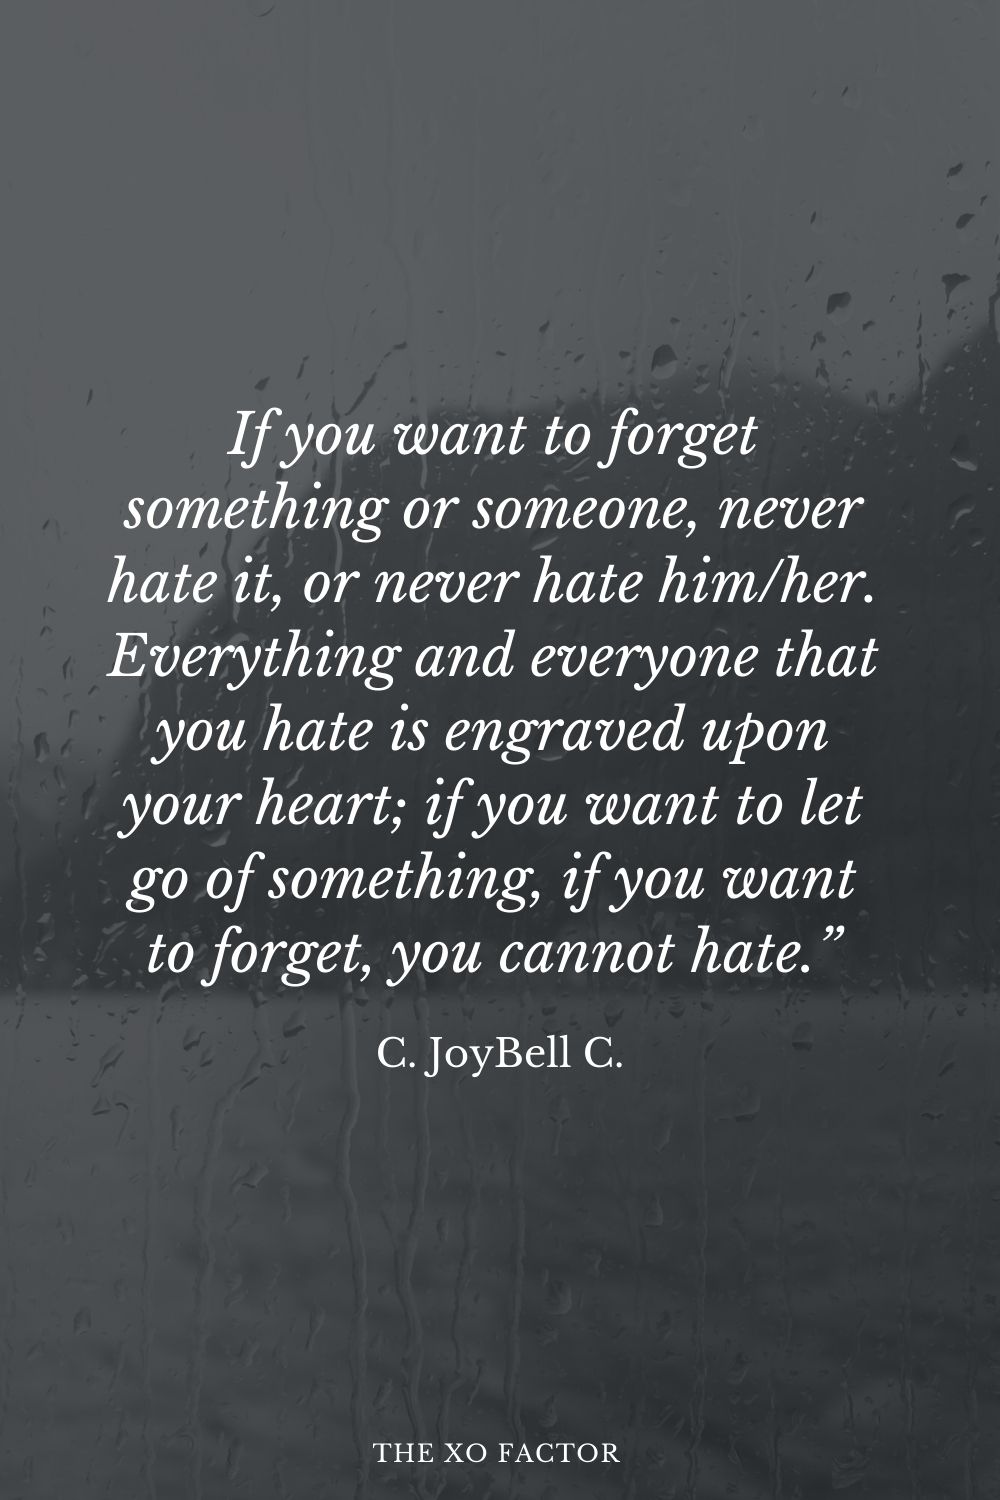 If you want to forget something or someone, never hate it, or never hate him/her. Everything and everyone that you hate is engraved upon your heart; if you want to let go of something, if you want to forget, you cannot hate.” C. JoyBell C.